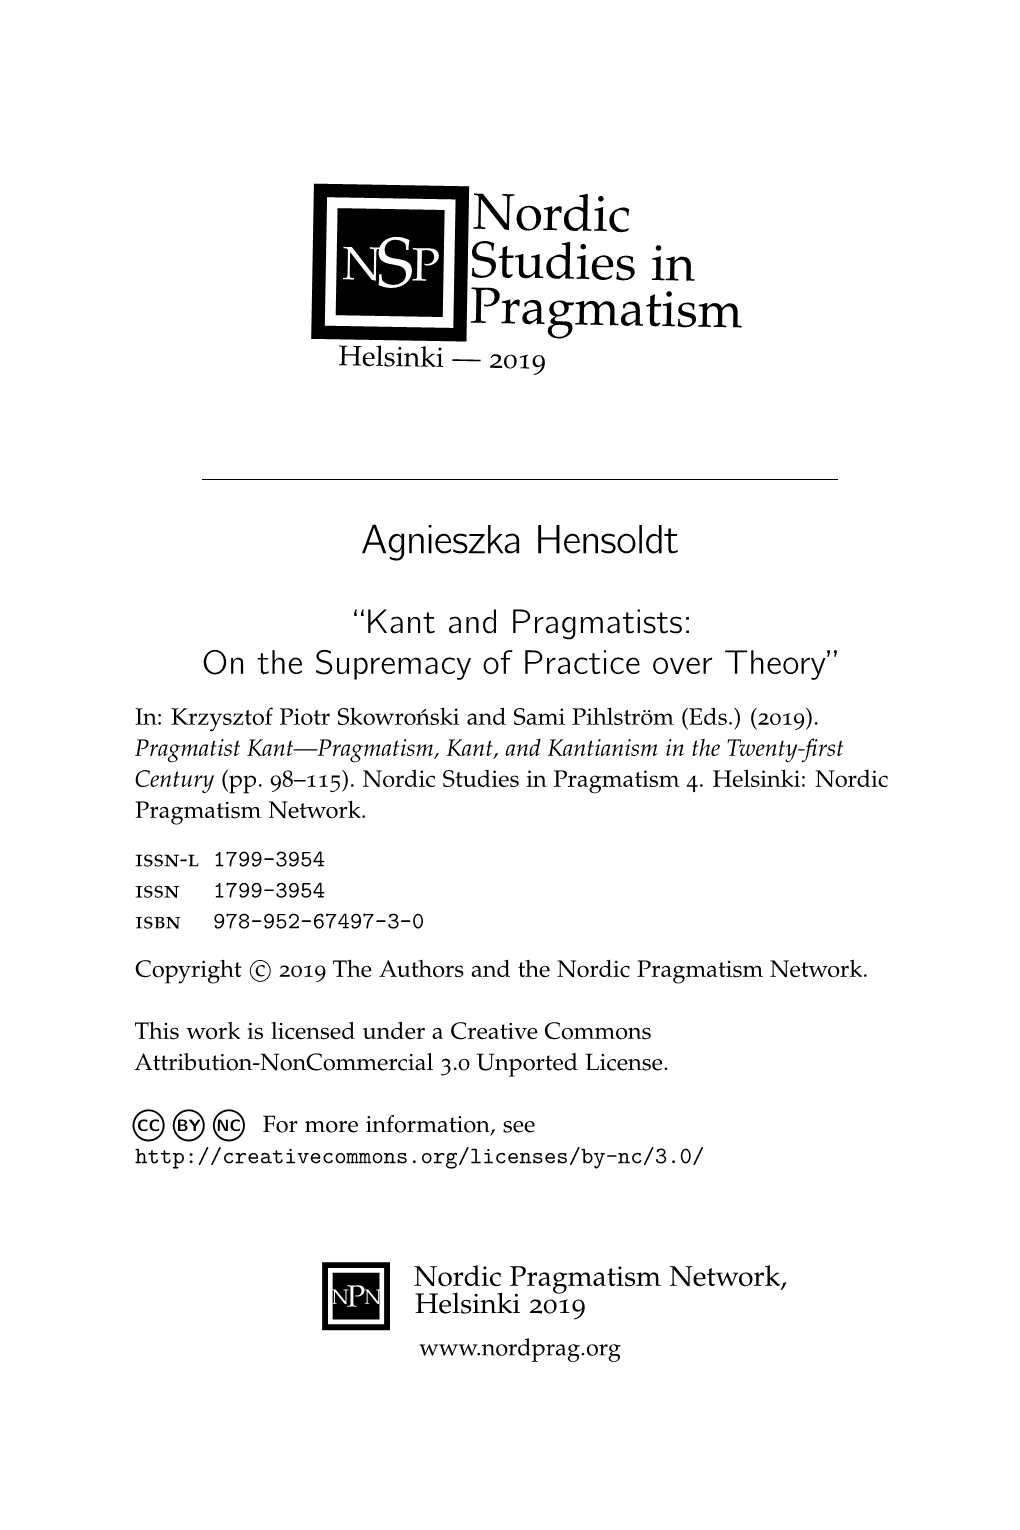 Kant and Pragmatists: on the Supremacy of Practice Over Theory”